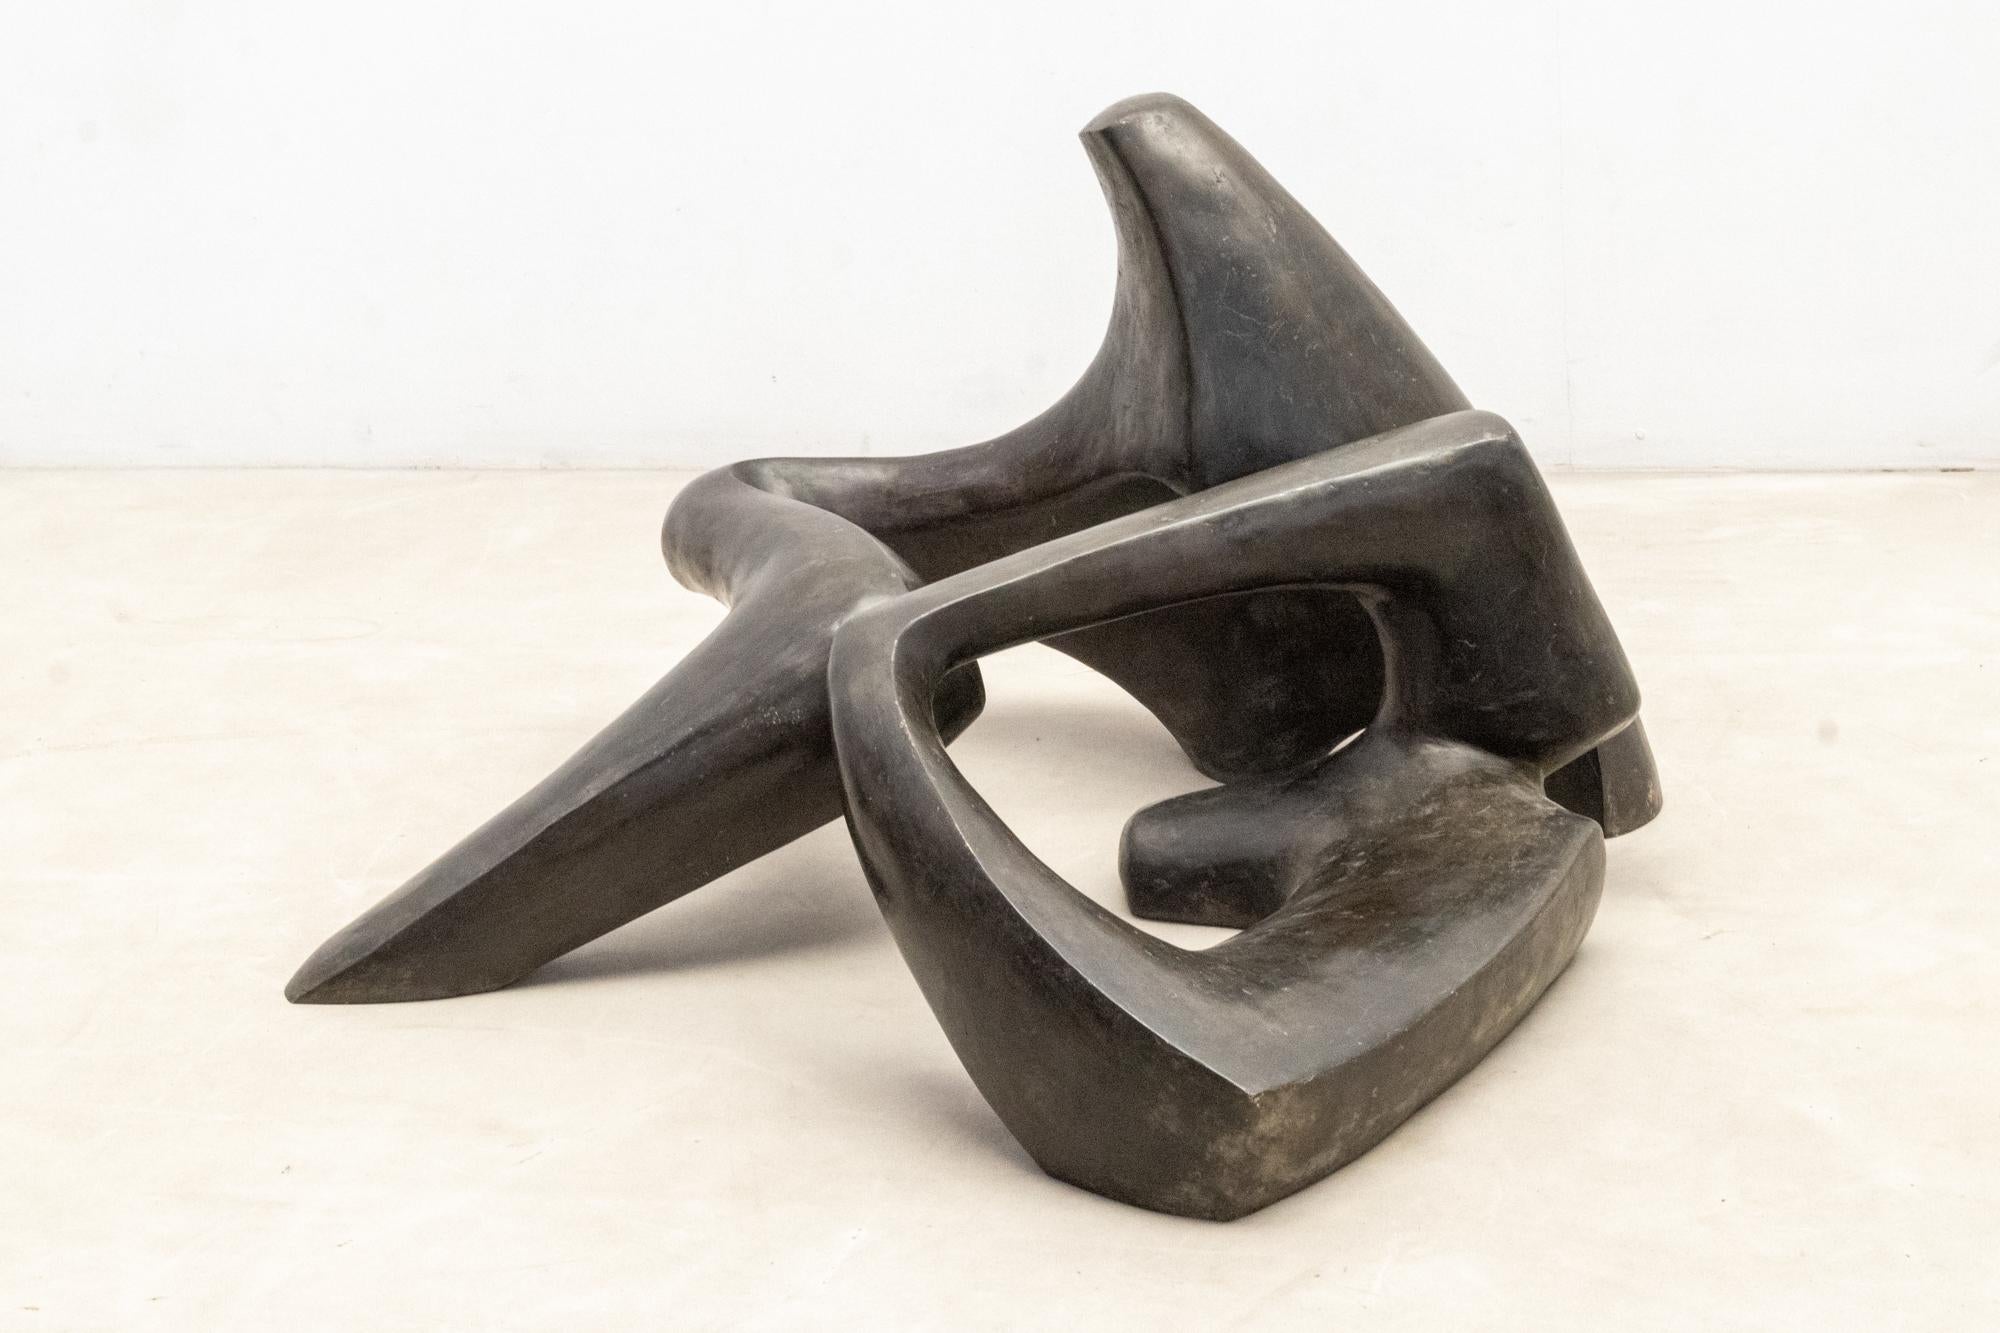 André Delessert (1923-2010), a distinguished Swiss sculptor and mathematician of the 20th century, crafted this abstract bronze sculpture to bear witness to his profound affiliation with the realm of abstraction. 
Partitioned into two distinct